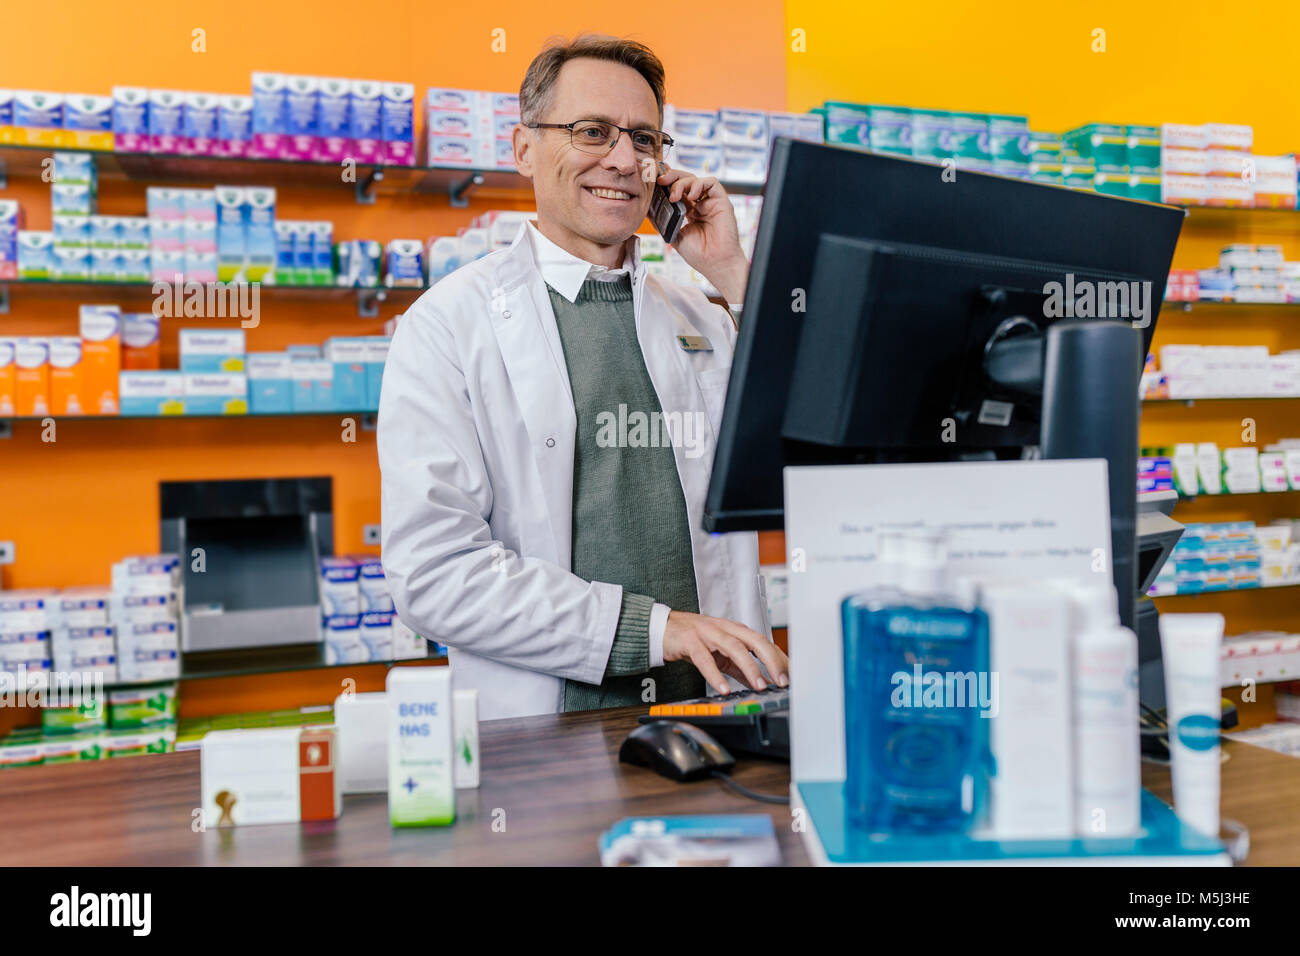 Smiling pharmacist talking on phone at counter in pharmacy Stock Photo